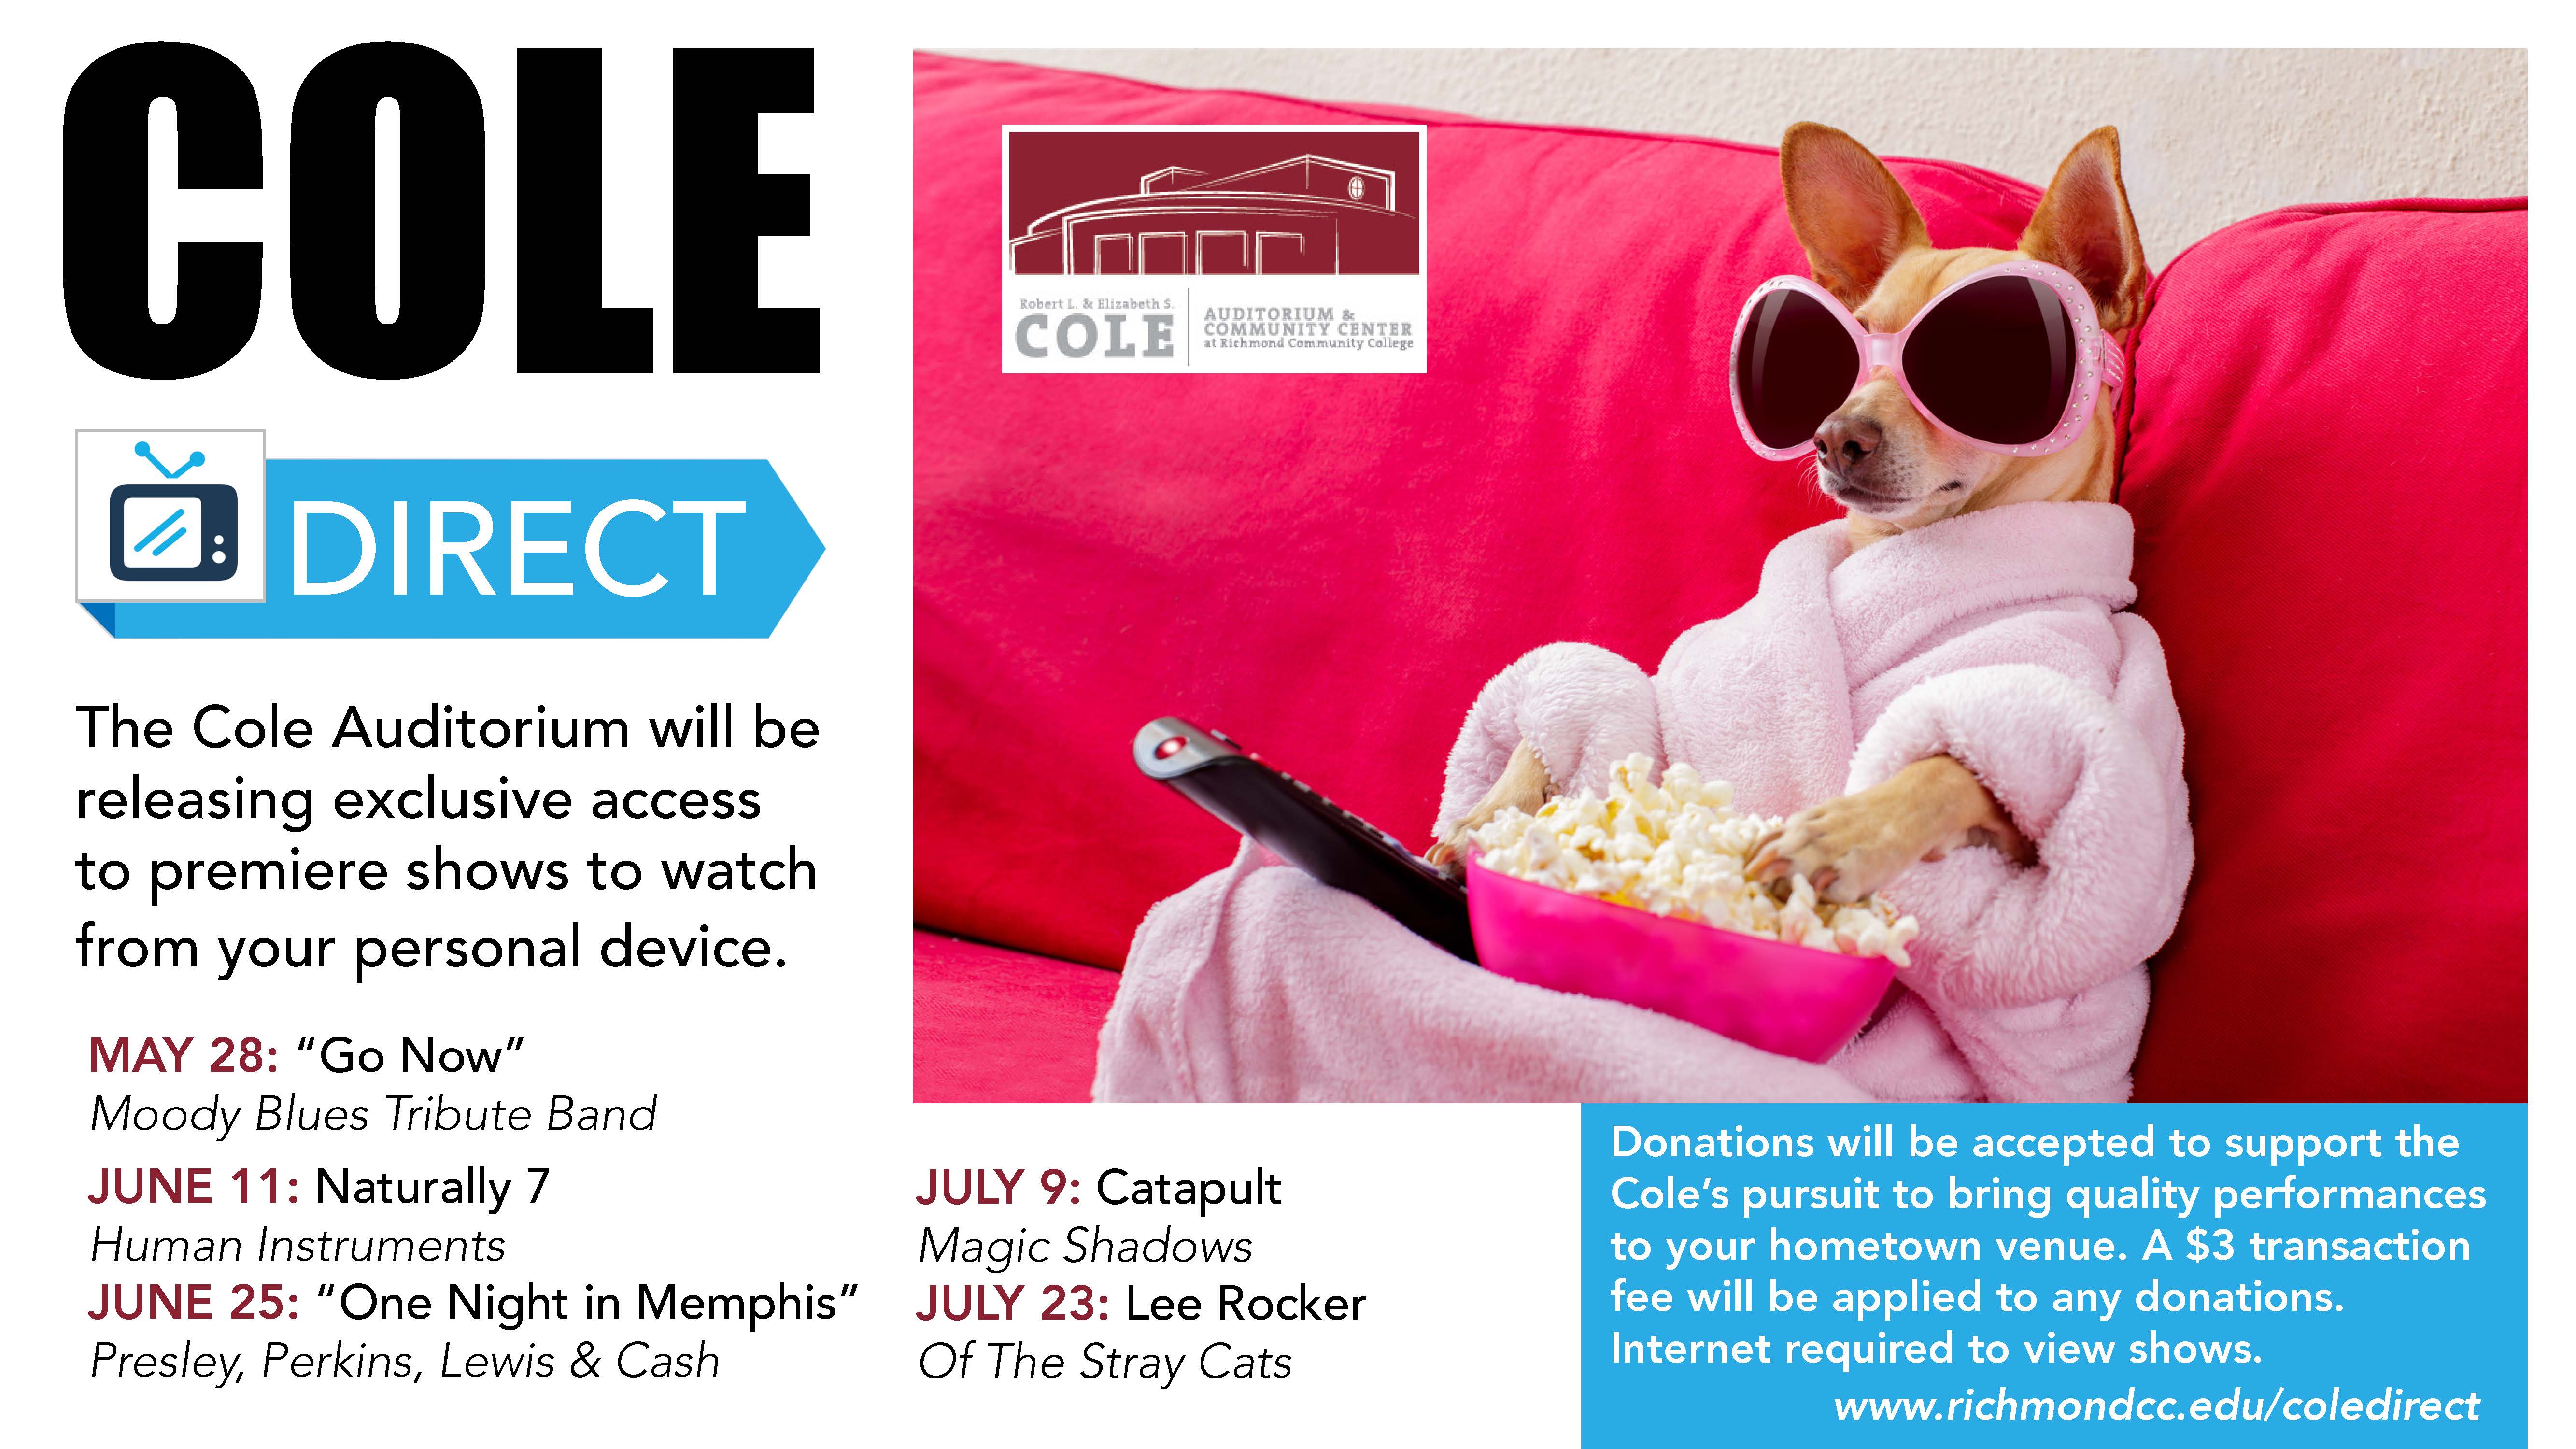 Cole Direct logo and show schedule with dog in pink robe with a TV remote and bowl of popcorn